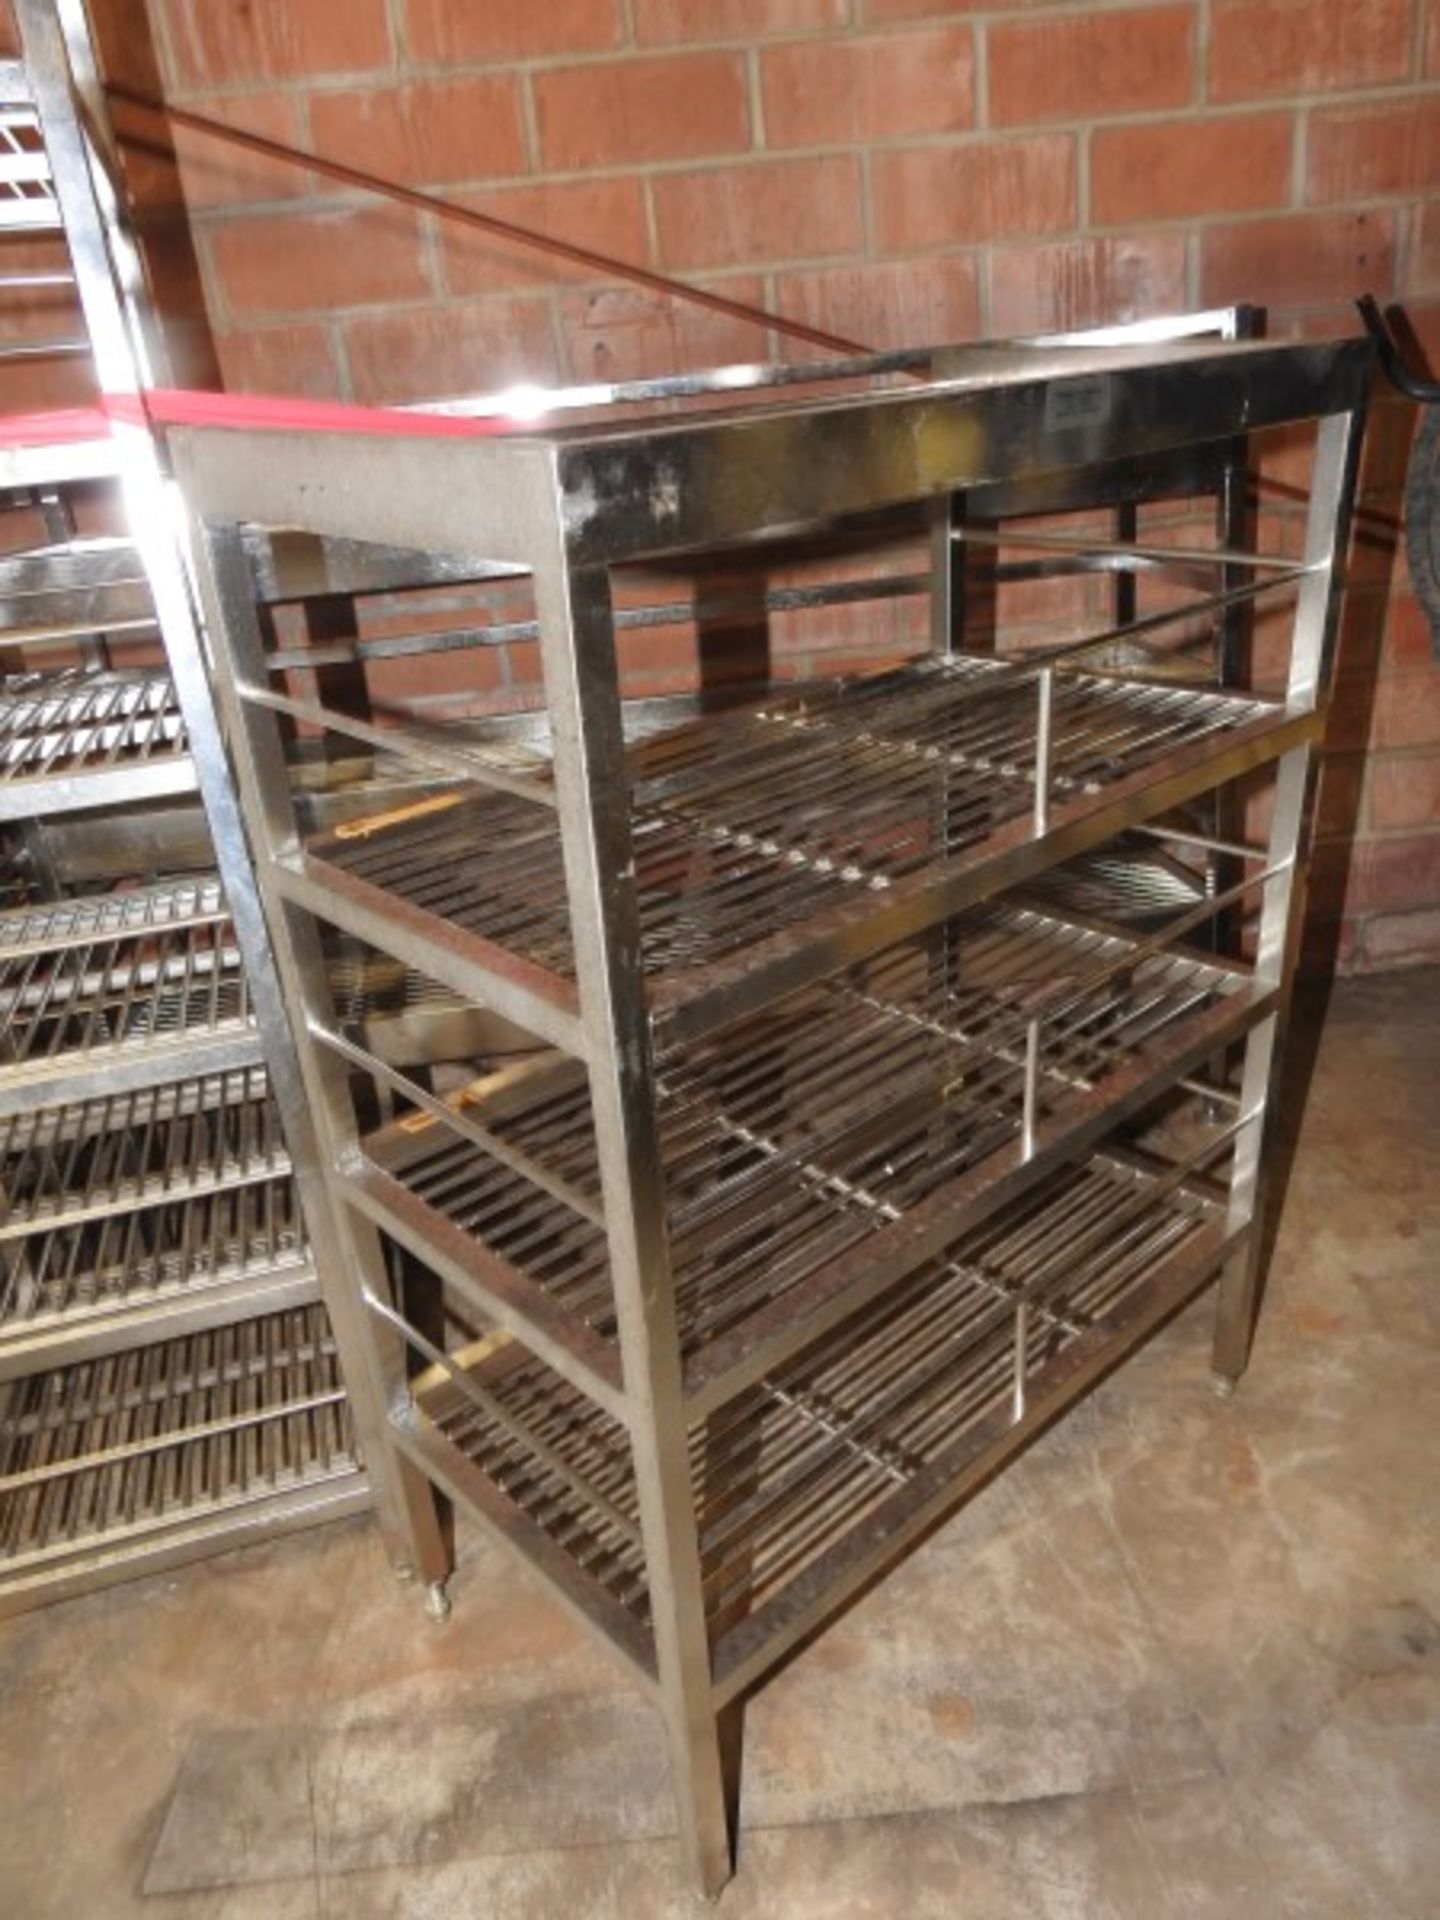 8PC STAINLESS HEAVY DUTY SHELVING - Image 5 of 6